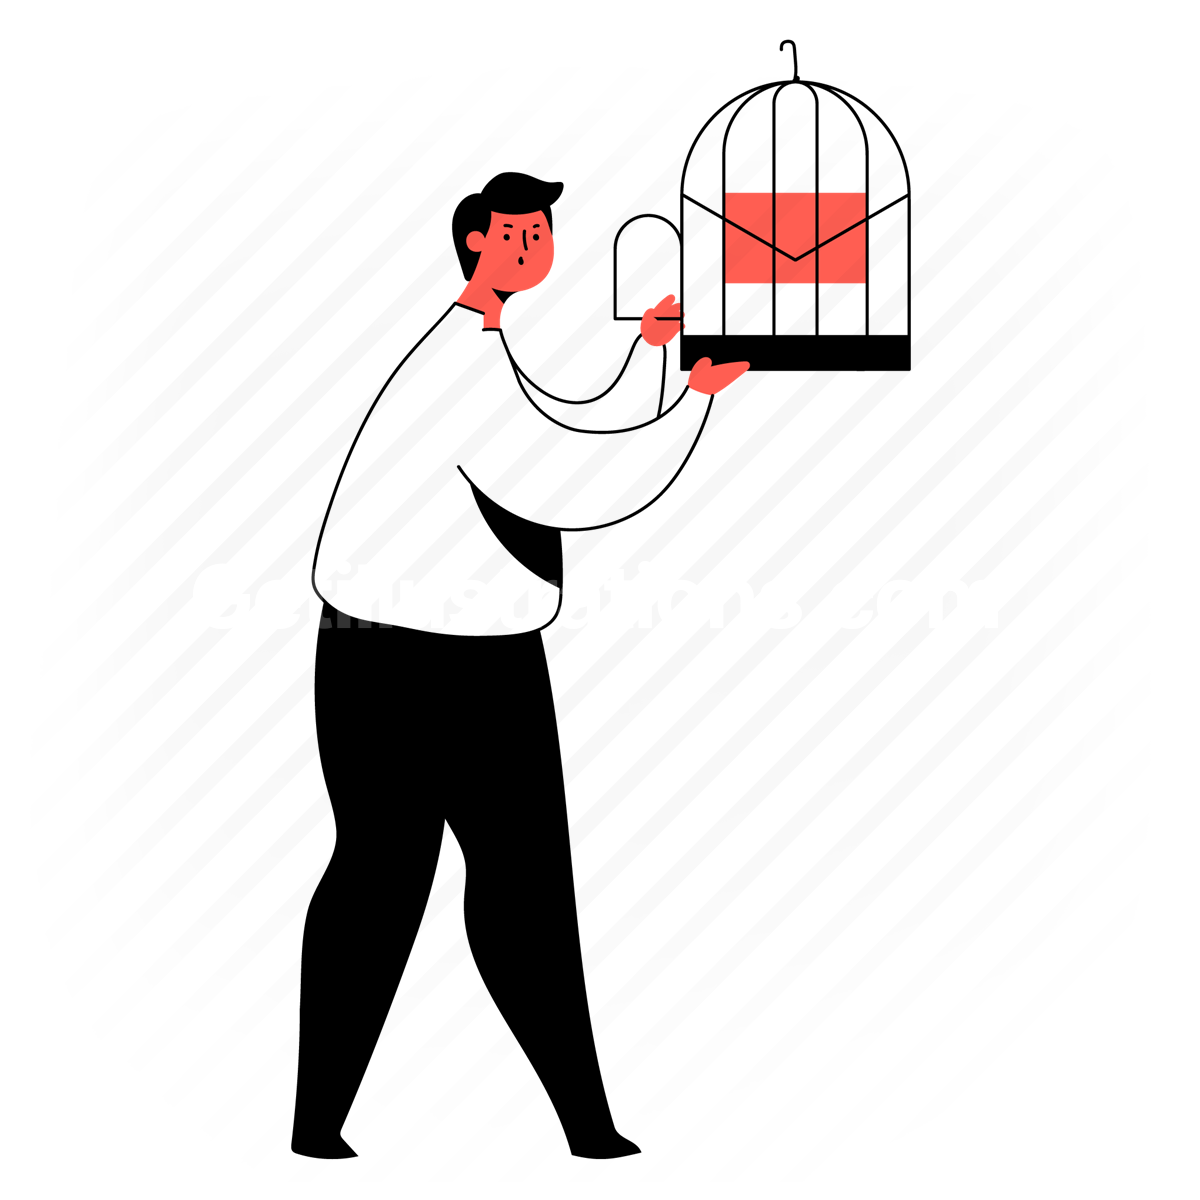 inbox, message, cage, birdcage, outbox, security, protection, safety